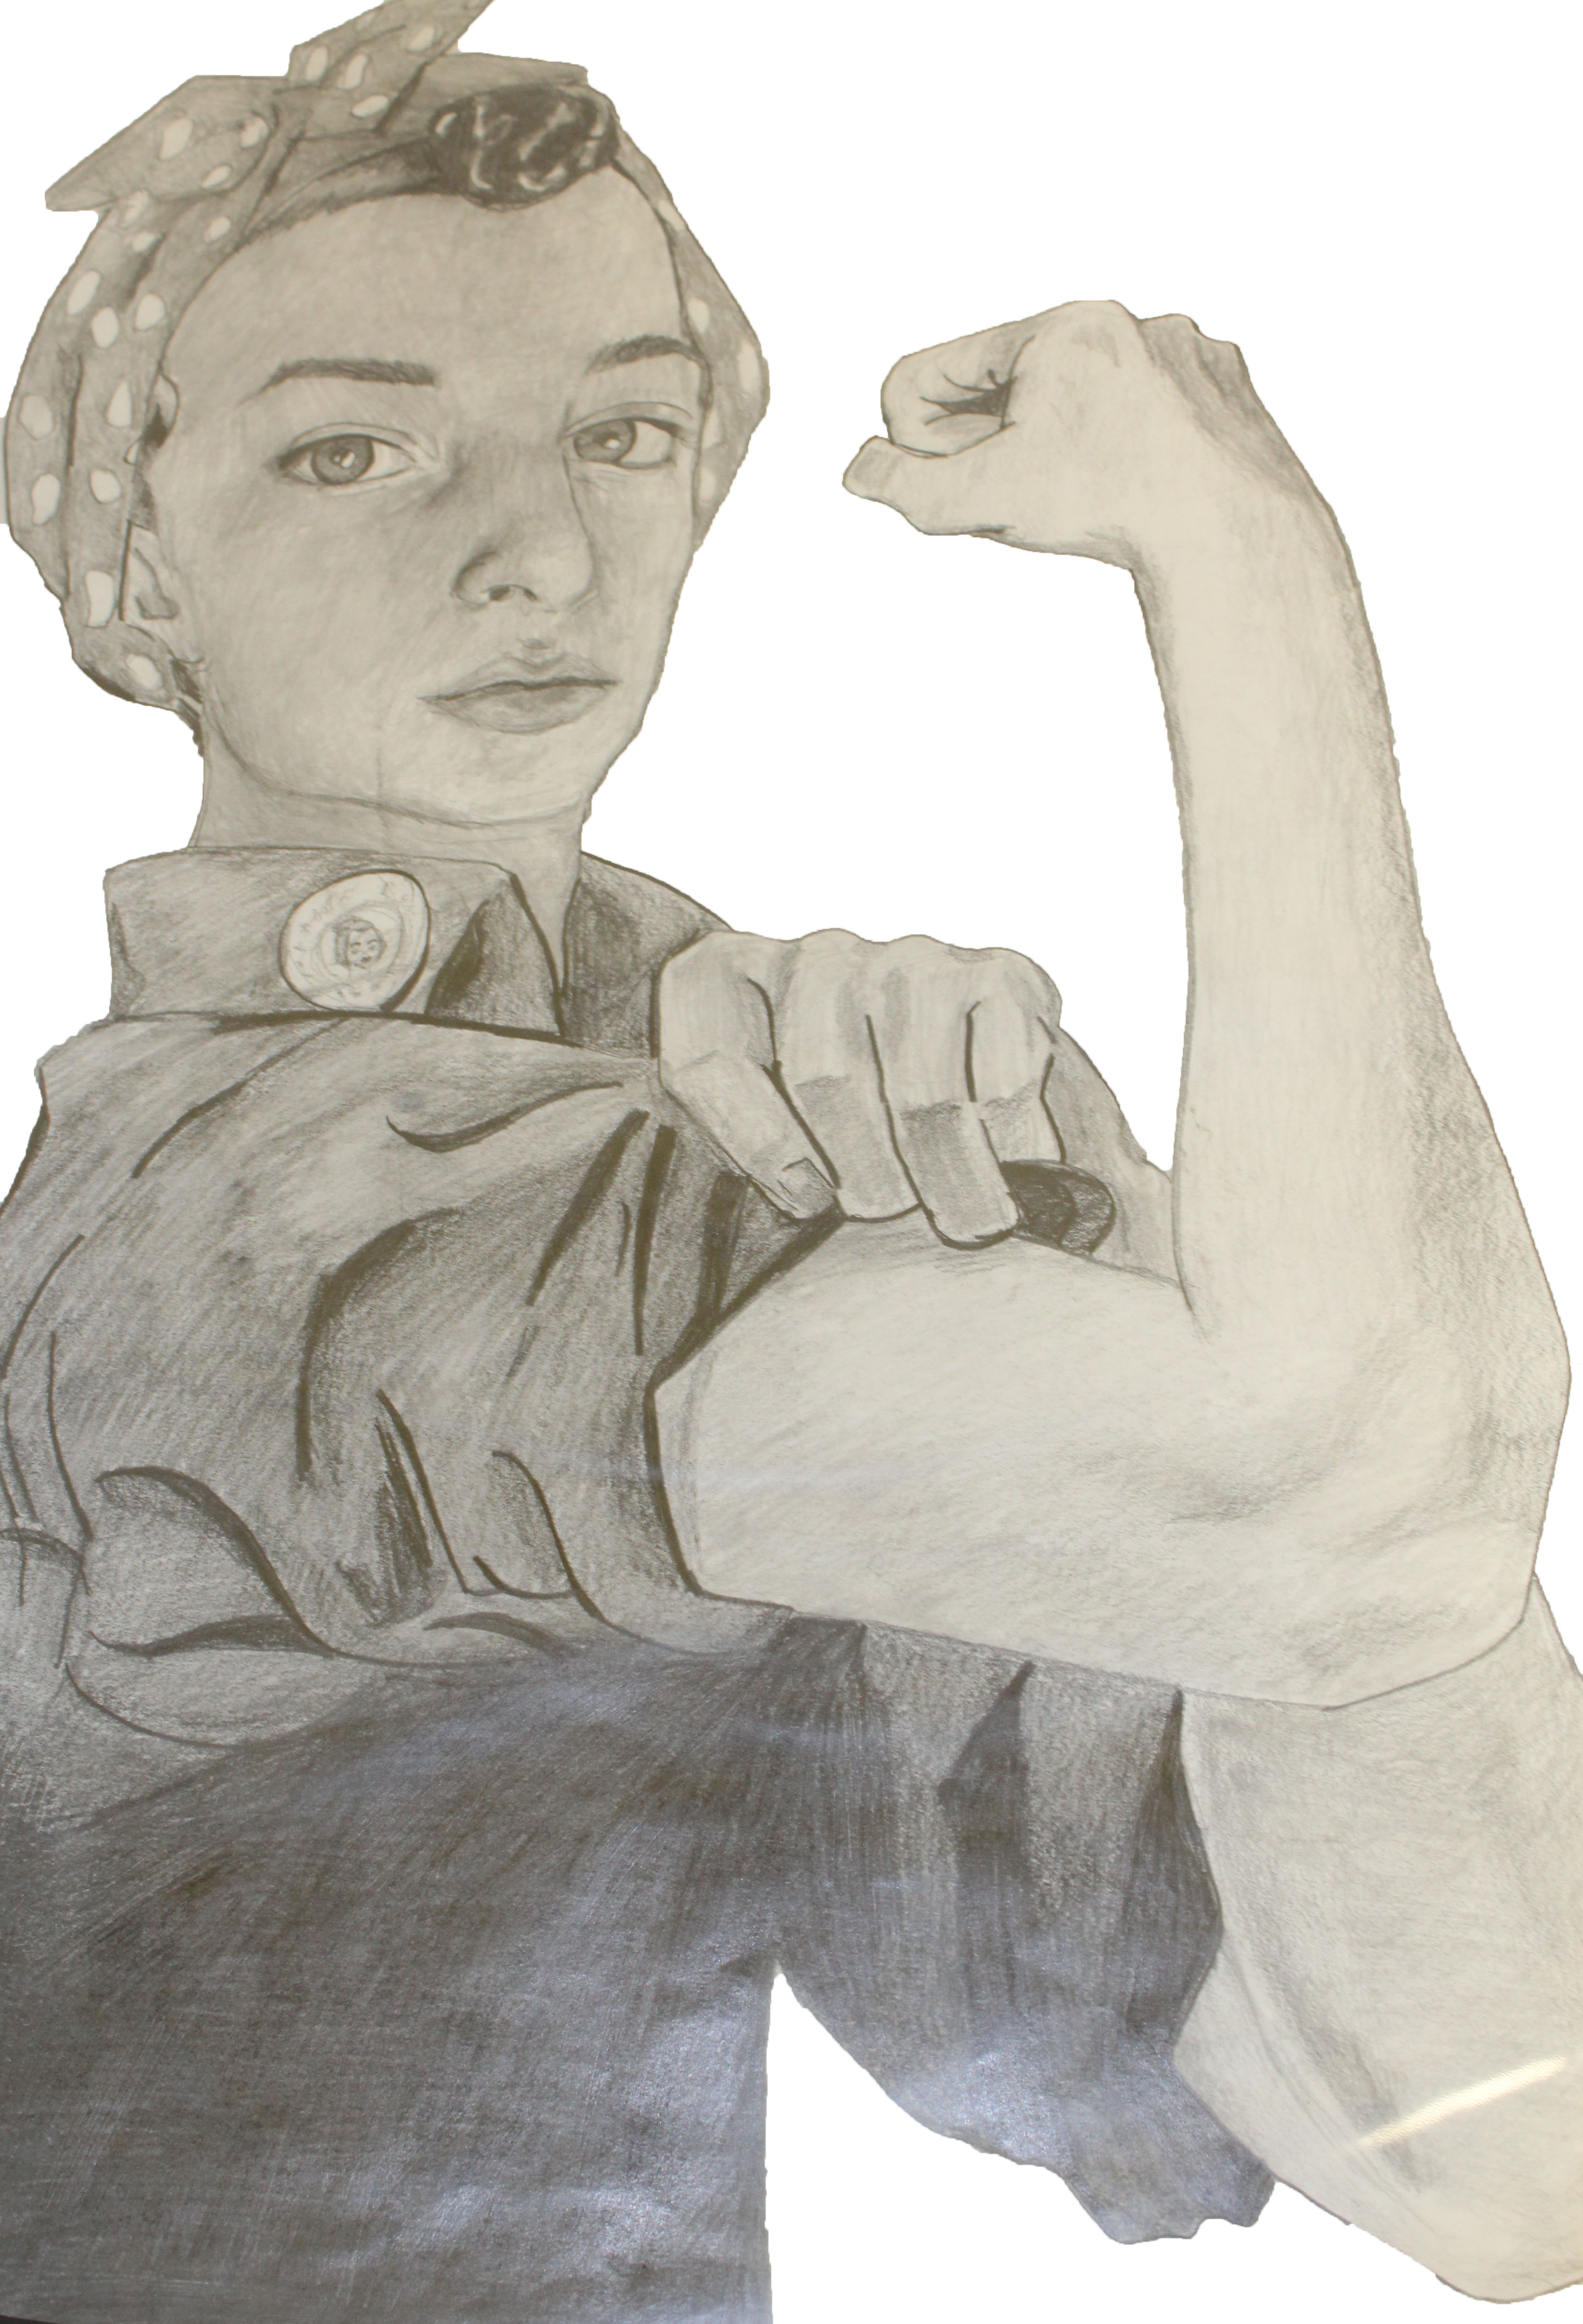 Pencil line drawing of the classic Rosie the Riveter drawing